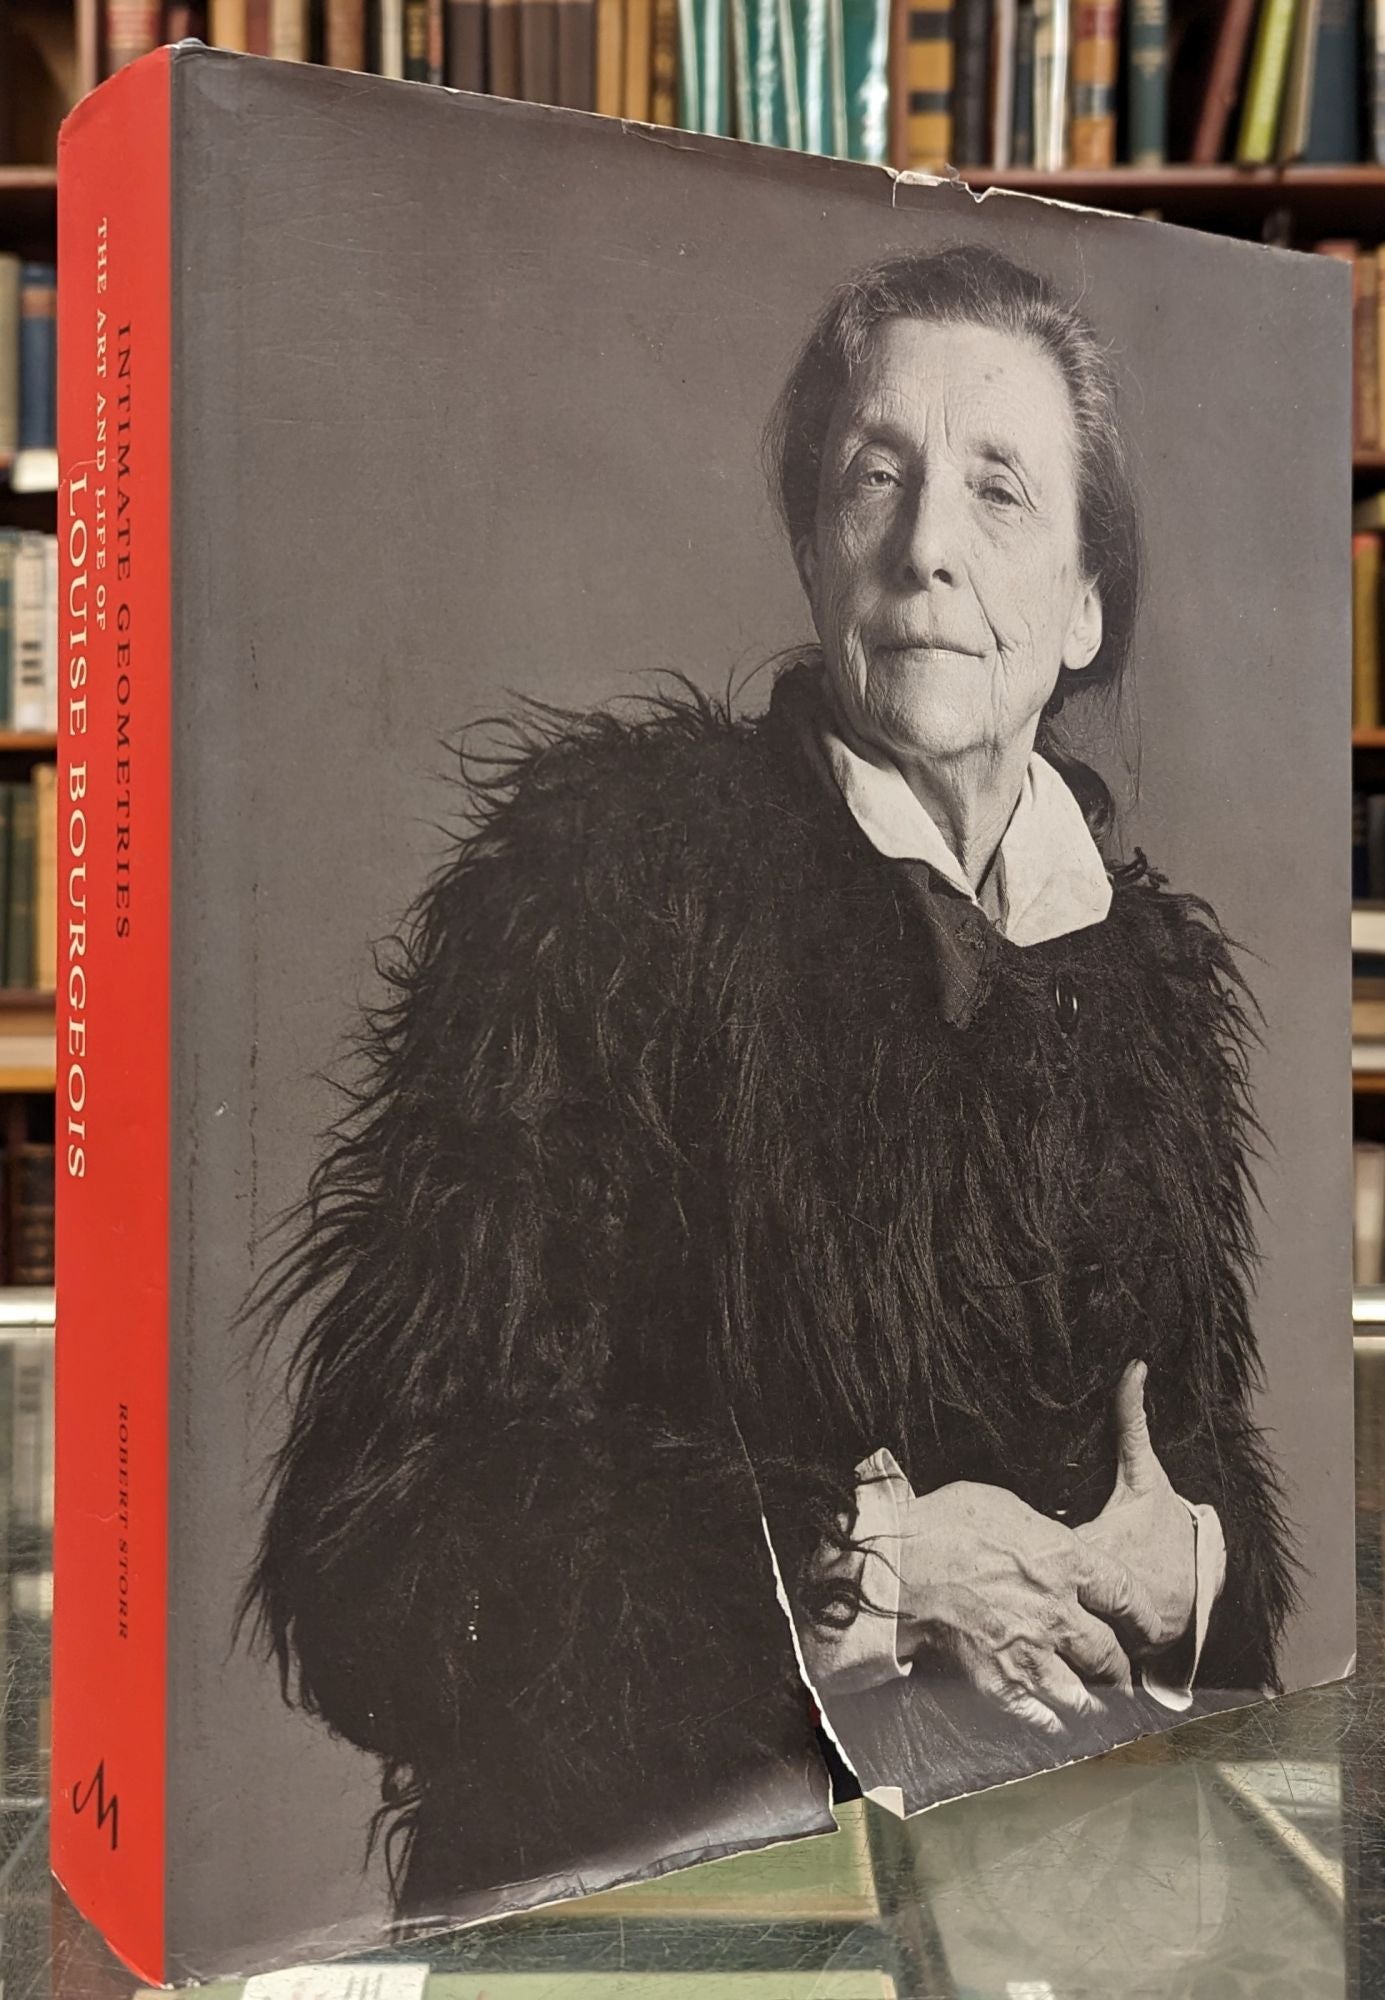 Intimate Geometries: The Art and Life of Louise Bourgeois by Robert Storr  on Moe's Books